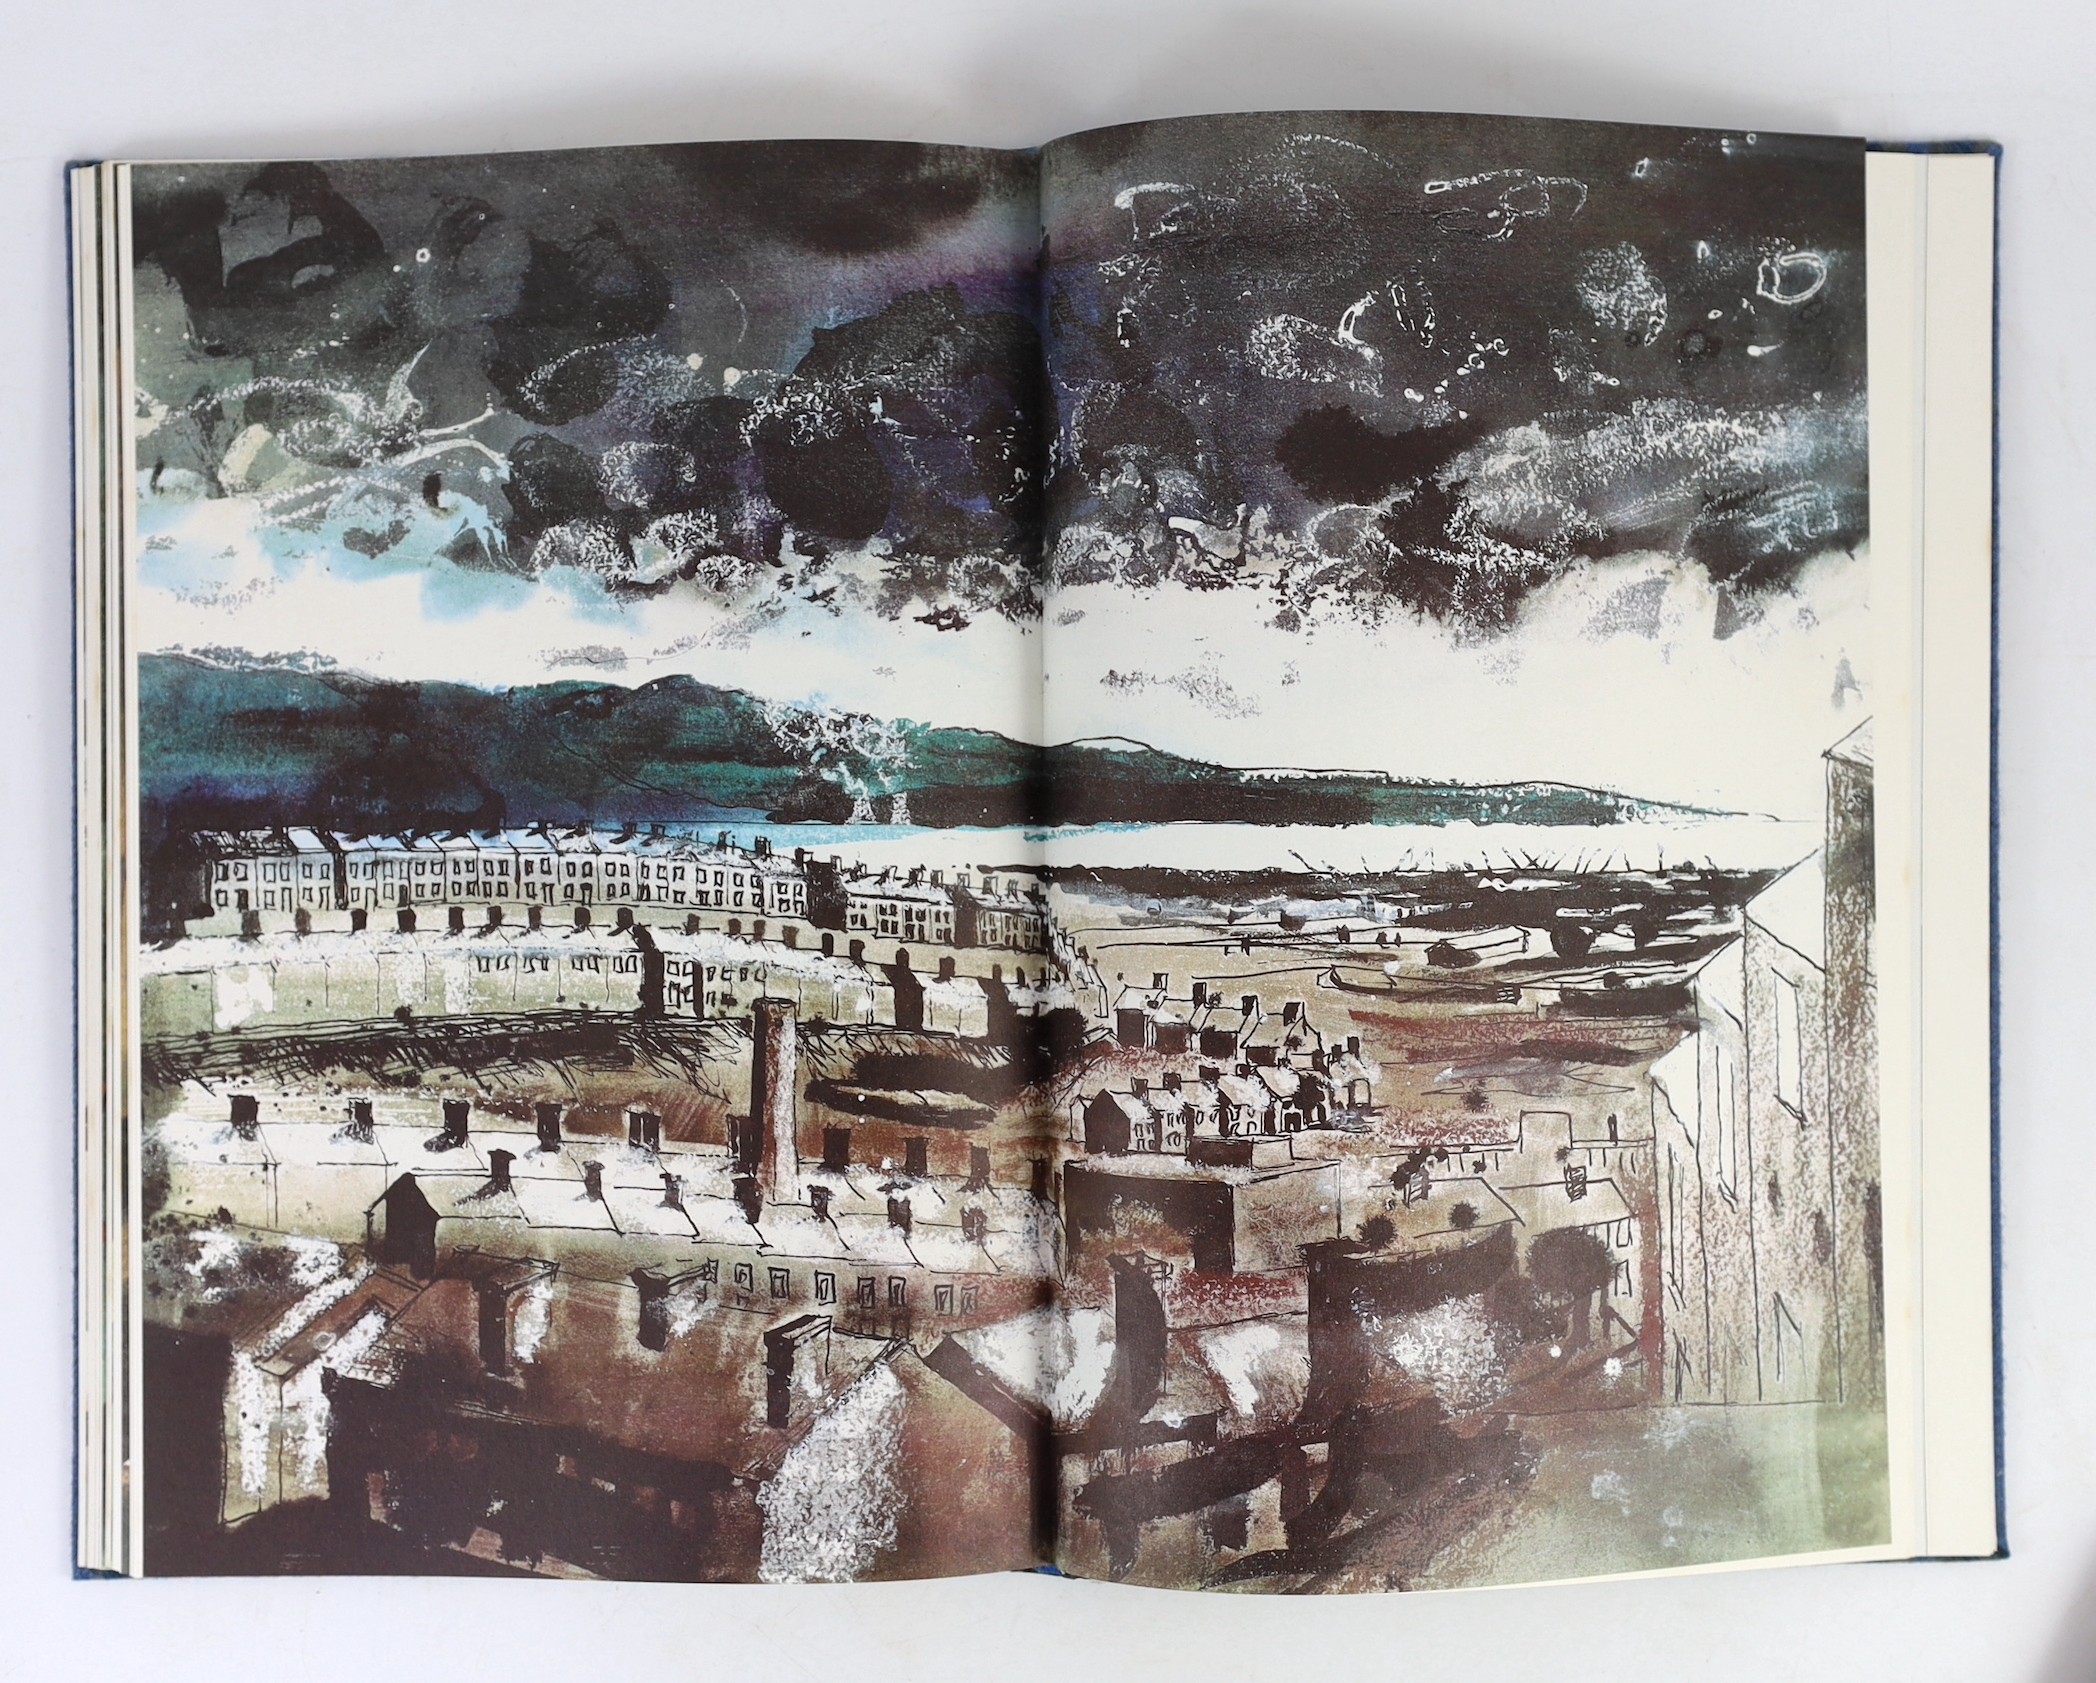 Thomas, Dylan - Deaths and Entrances, one of 250, illustrated by John Piper with coloured frontis and 7 double page plates, folio, blue quarter morocco cloth covered boards, Gwasg Gregynog, Newtown, 1984, in slip case.